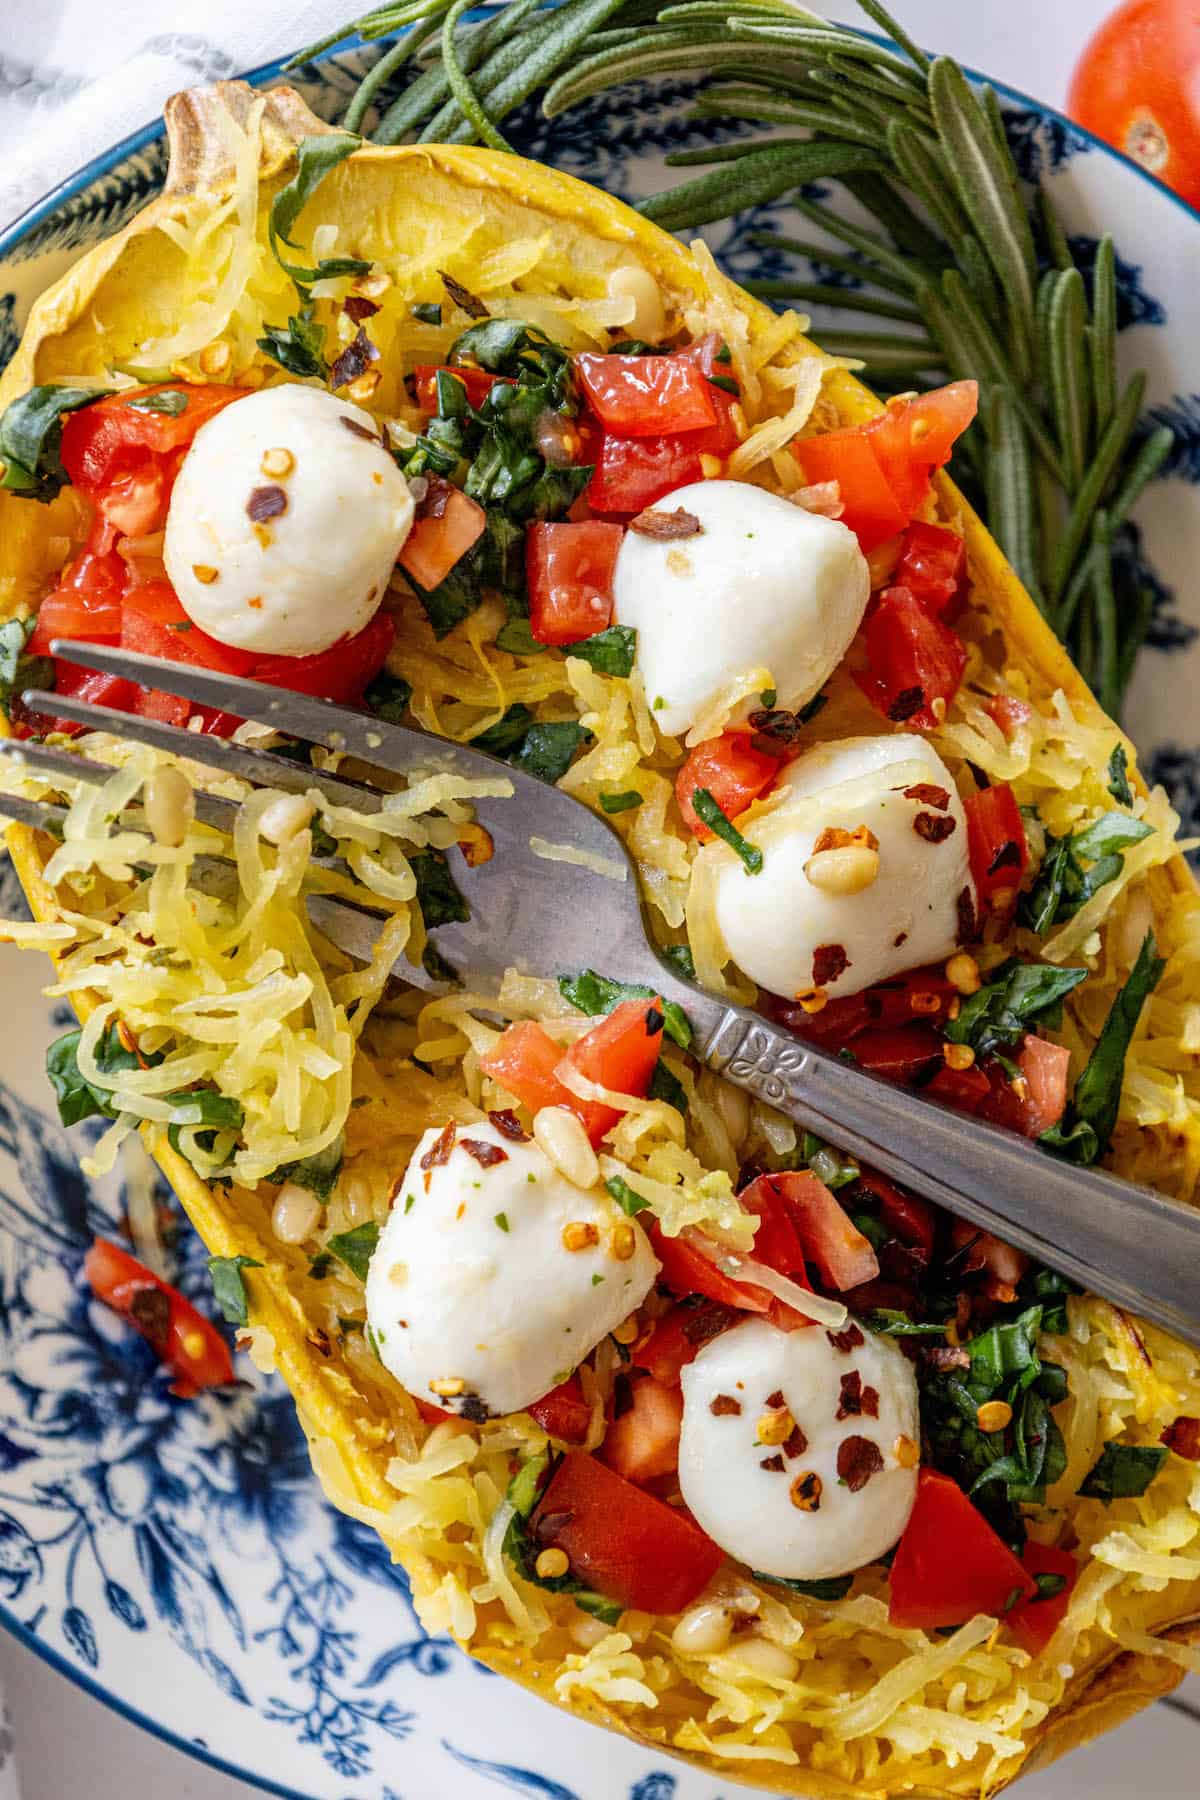 Baked Caprese spaghetti squash with mozzarella and tomatoes on a blue and white plate.